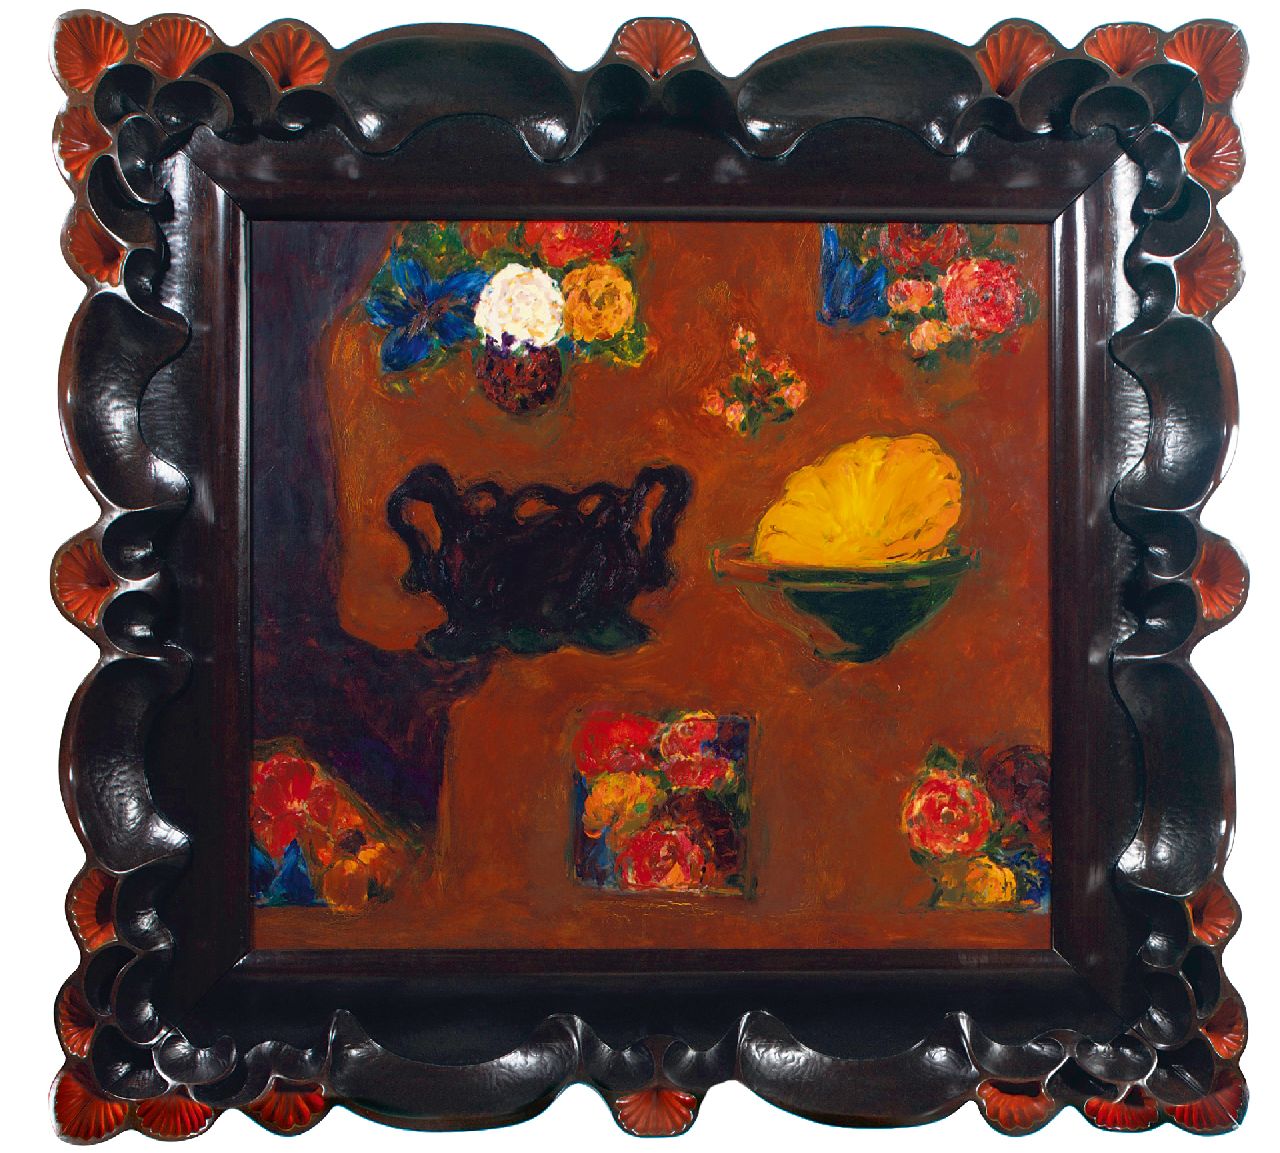 Hoek H. van | Hans van Hoek | Paintings offered for sale | Bowl within a bowl, oil on canvas 145.0 x 145.0 cm, signed on the reverse and dated on the reverse '95-97